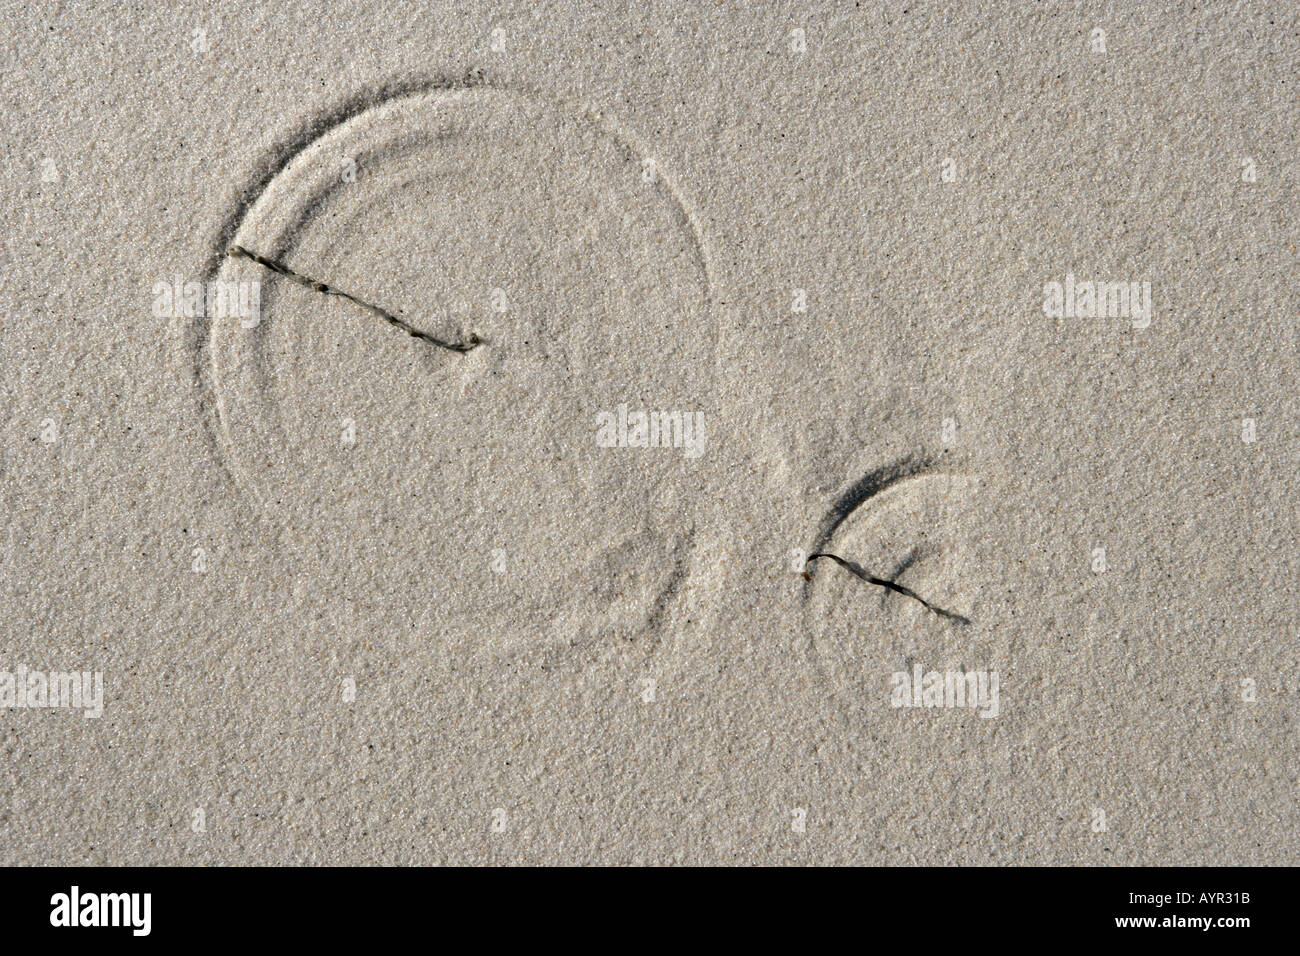 Bits of dried eel grass trapped by sand on a beach carve circles in the sand as they move in the breeze Stock Photo